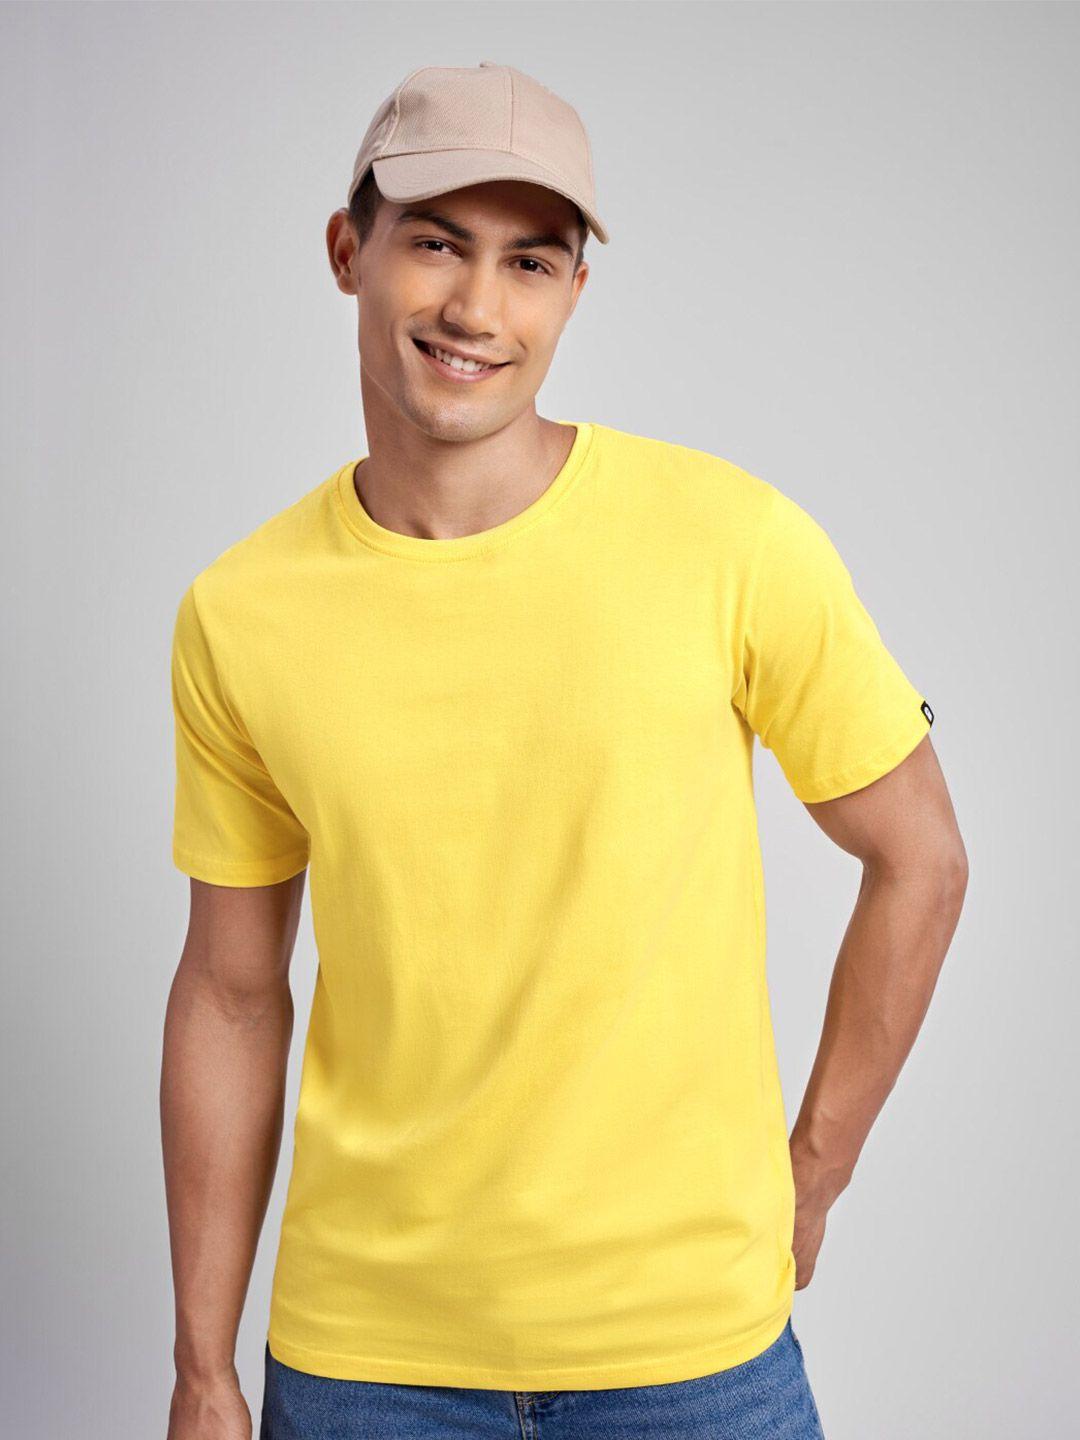 the souled store men yellow t-shirt